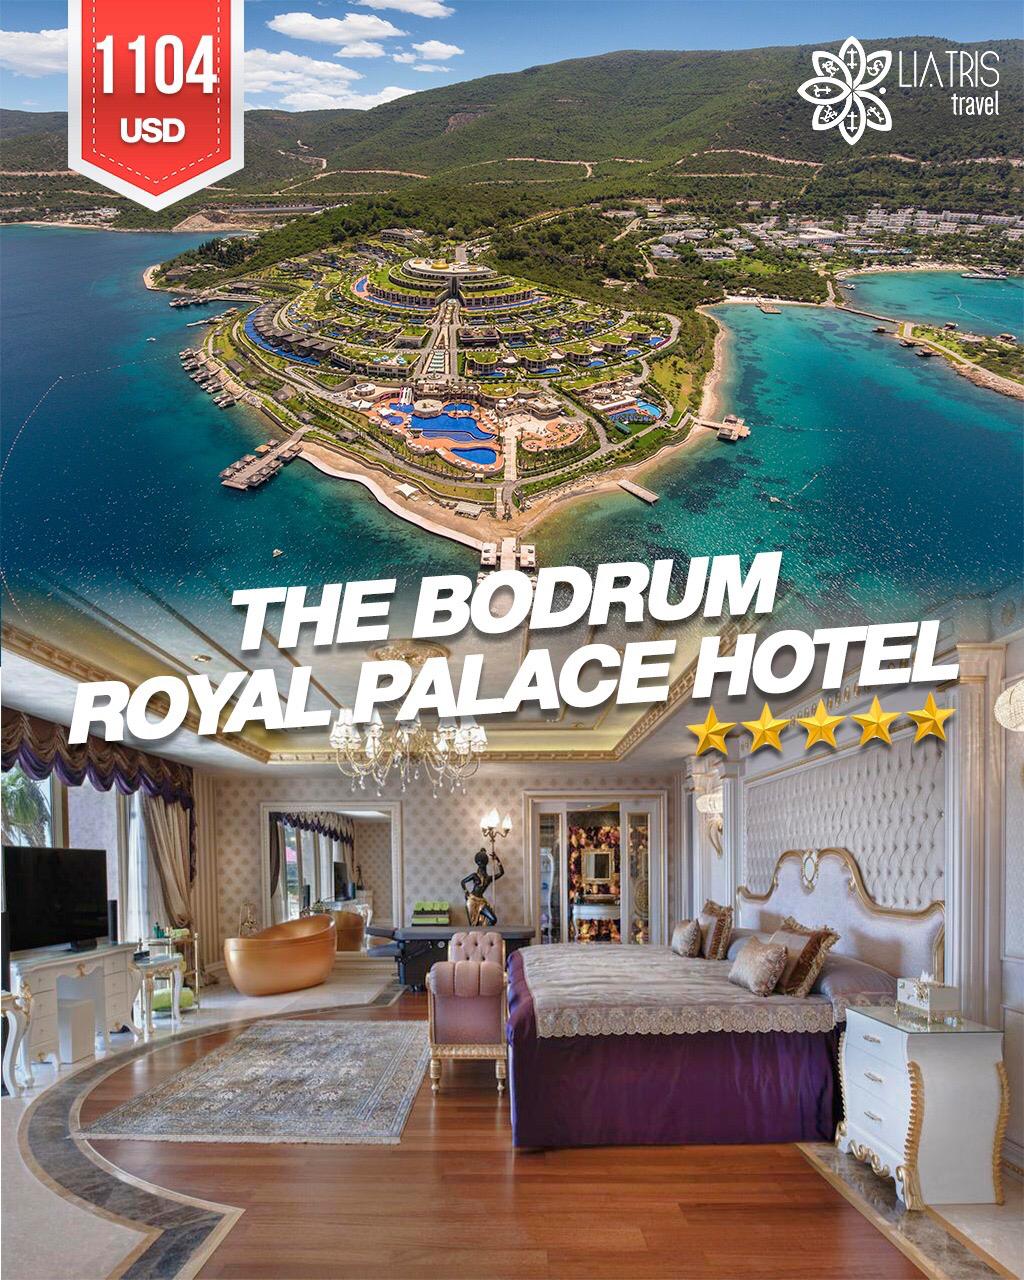 THE BODRUM ROYAL PALACE 5*